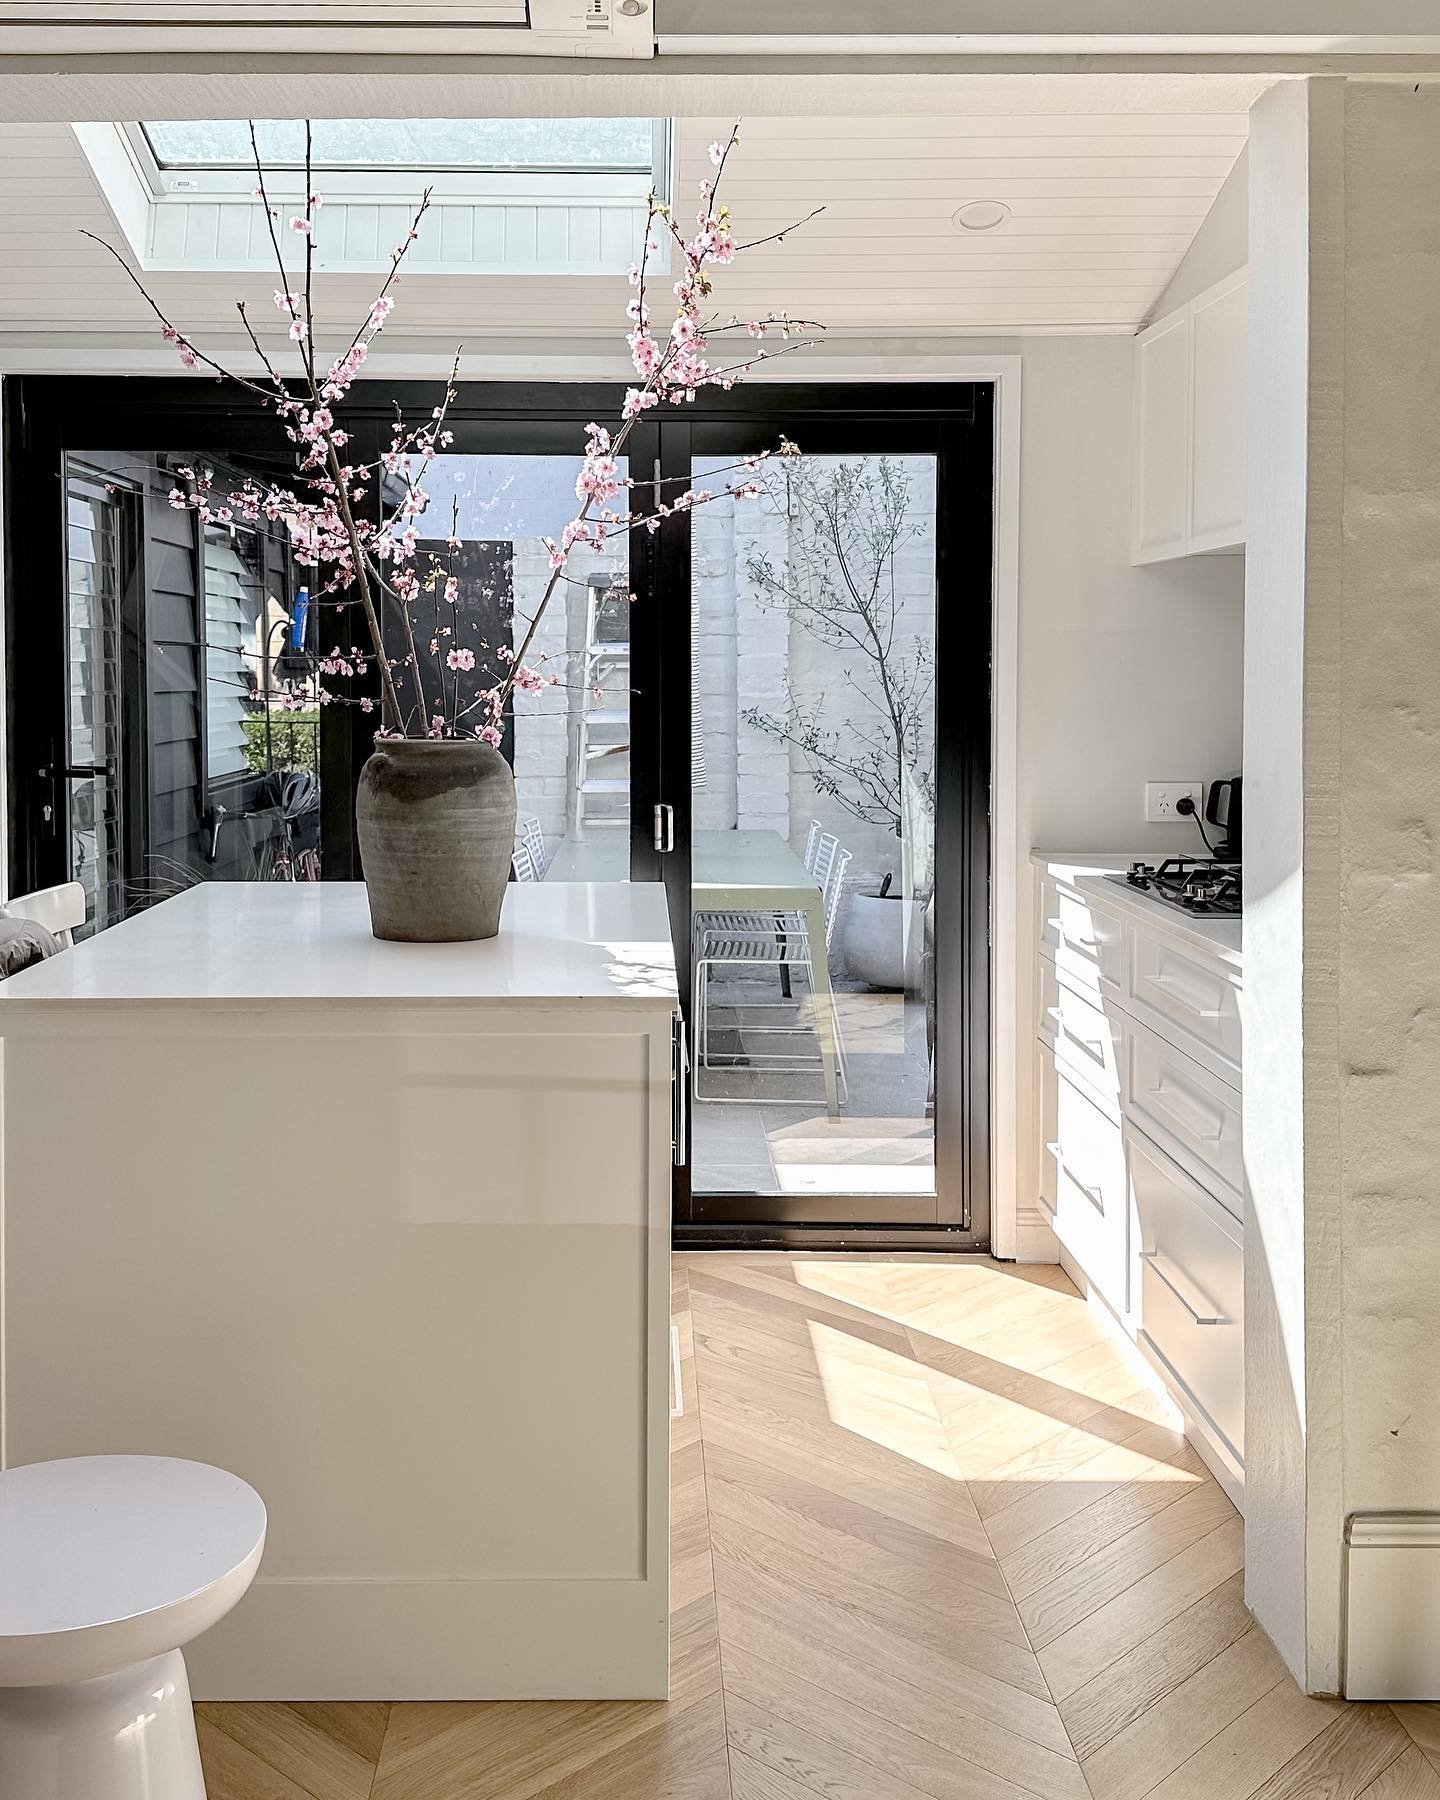 🌸 spring has sprung

Loving the light at this time of year, the rear to north aspect and oversized @veluxaustralia skylight let in all the good rays and vibes ☀️

#spring #chevronfloor #parquetryflooring #oak #kitchendesign #skylight #sydneyterrace